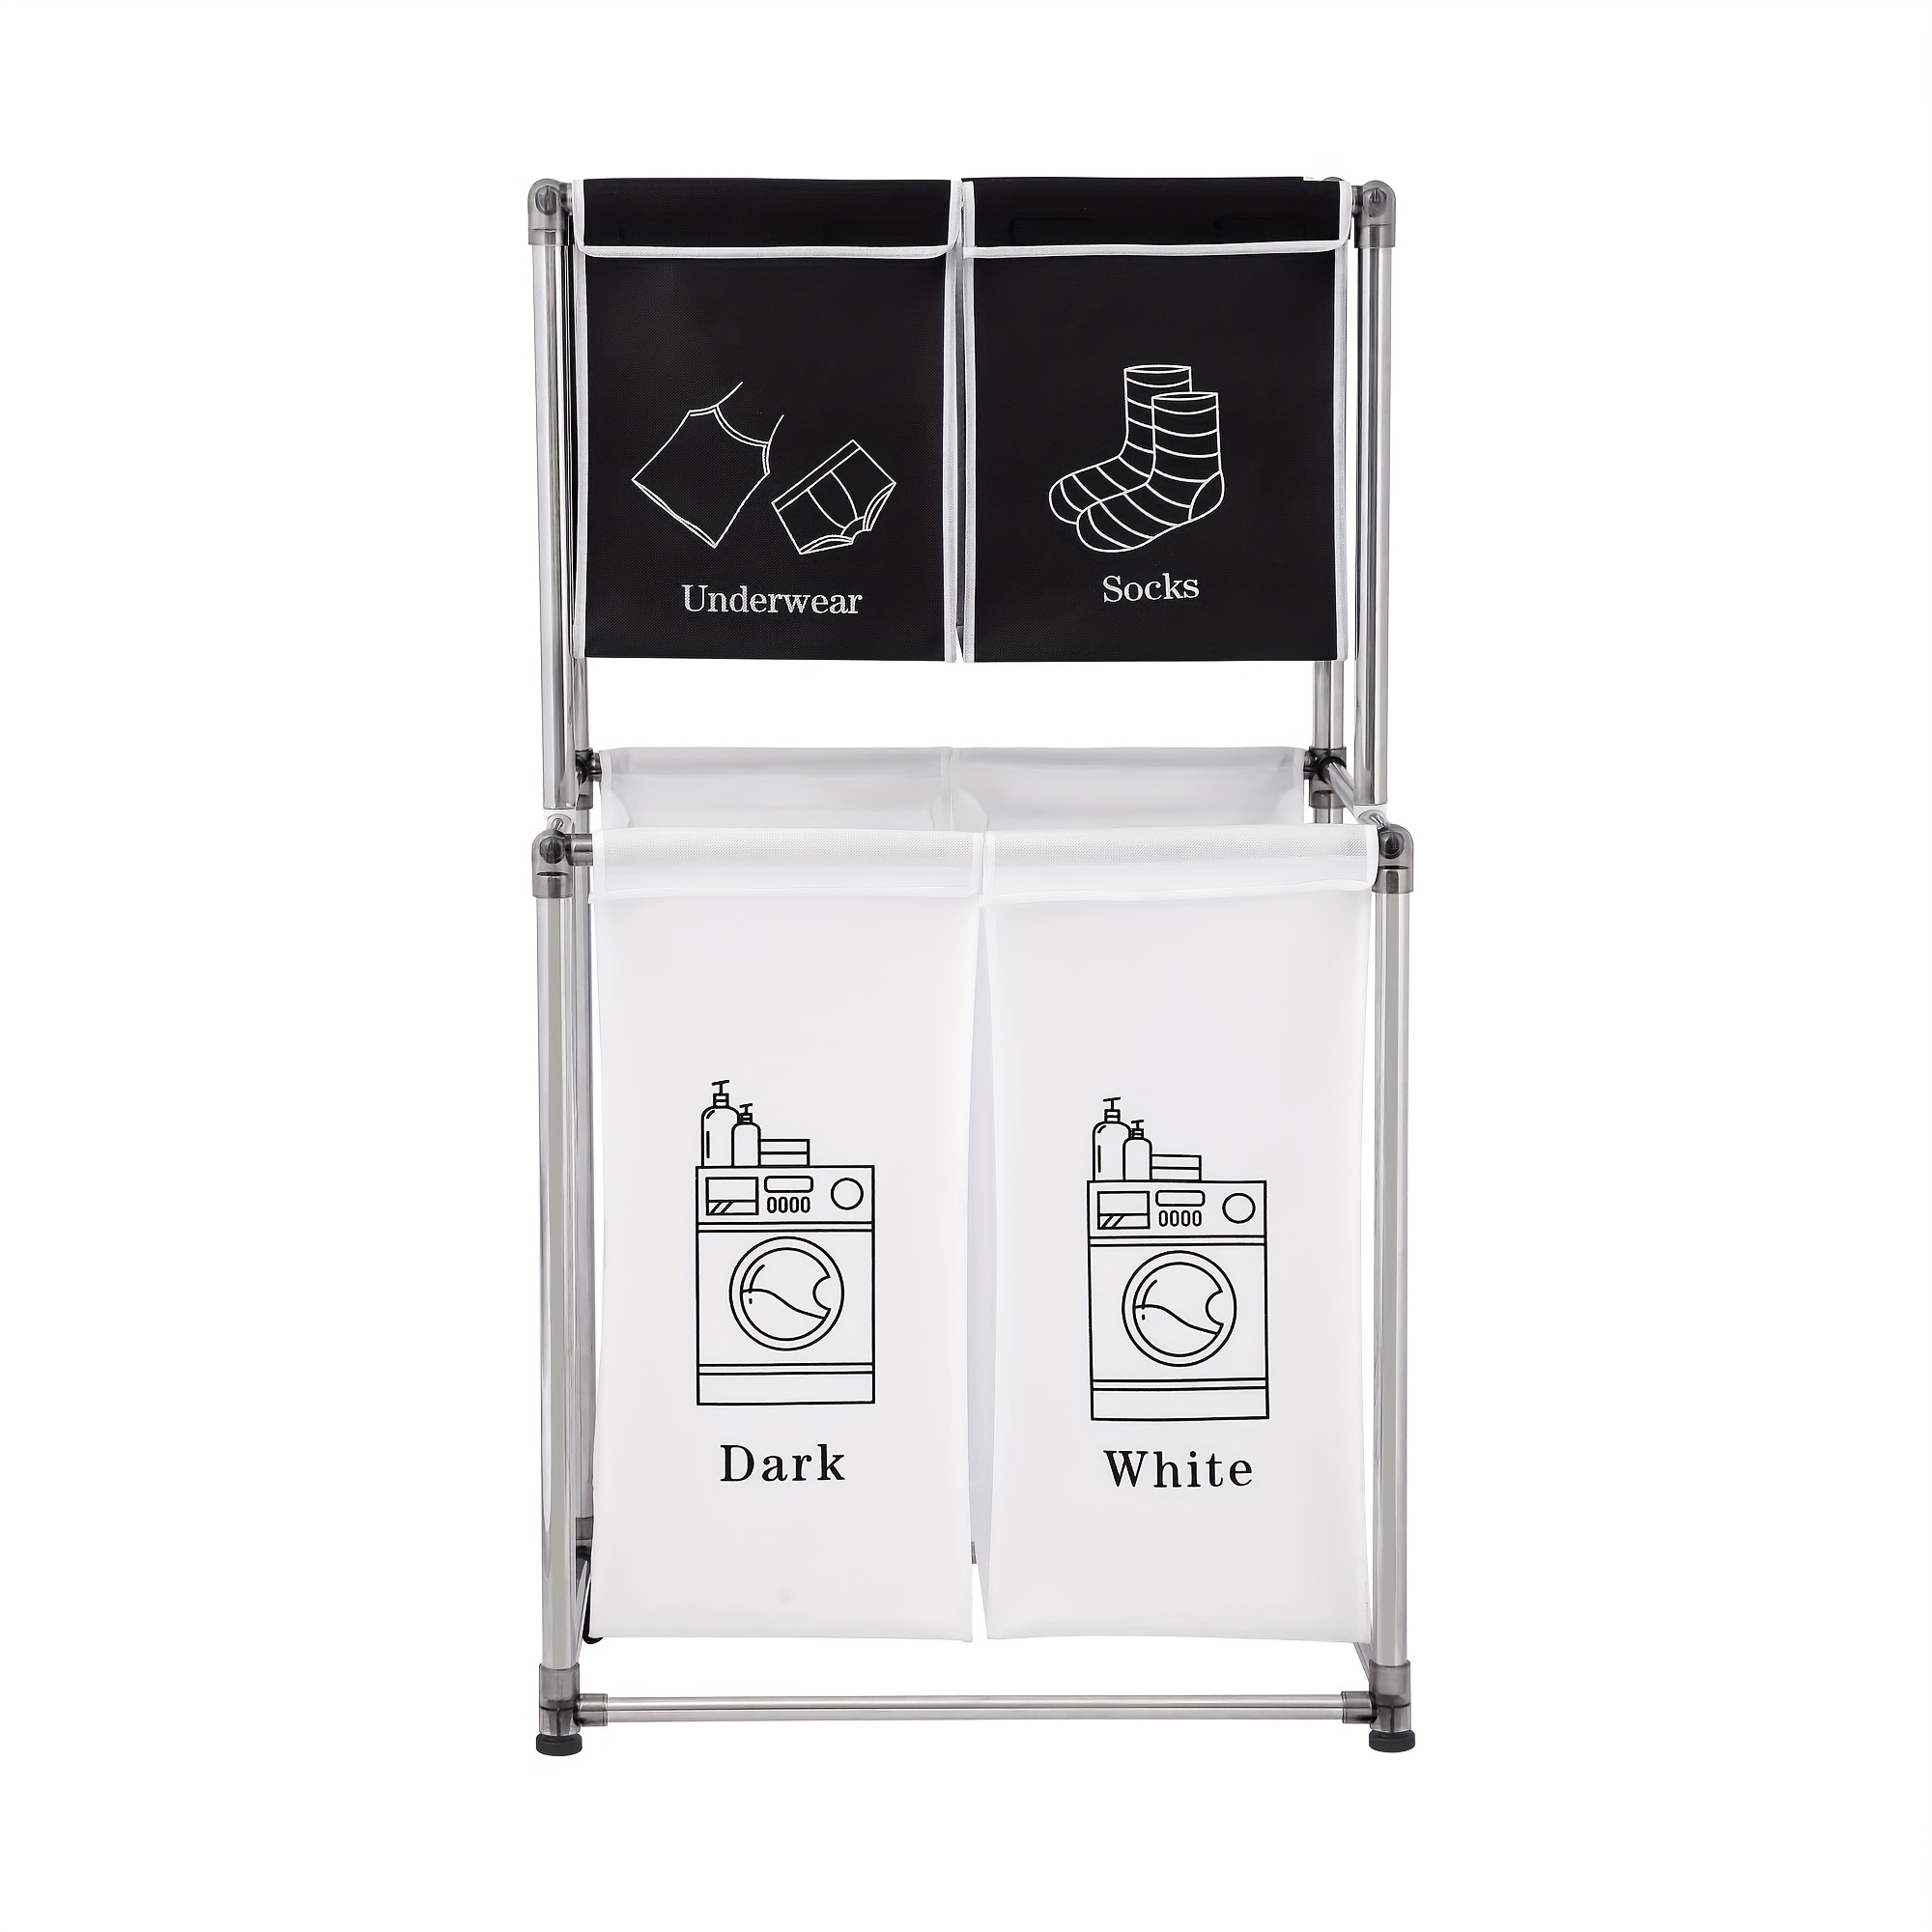 

4-bag Divided Dirty Clothes Laundry Hamper 2 Tier Vertical Laundry Basket Organizer With 4 Removable Bags For Clothes Storage